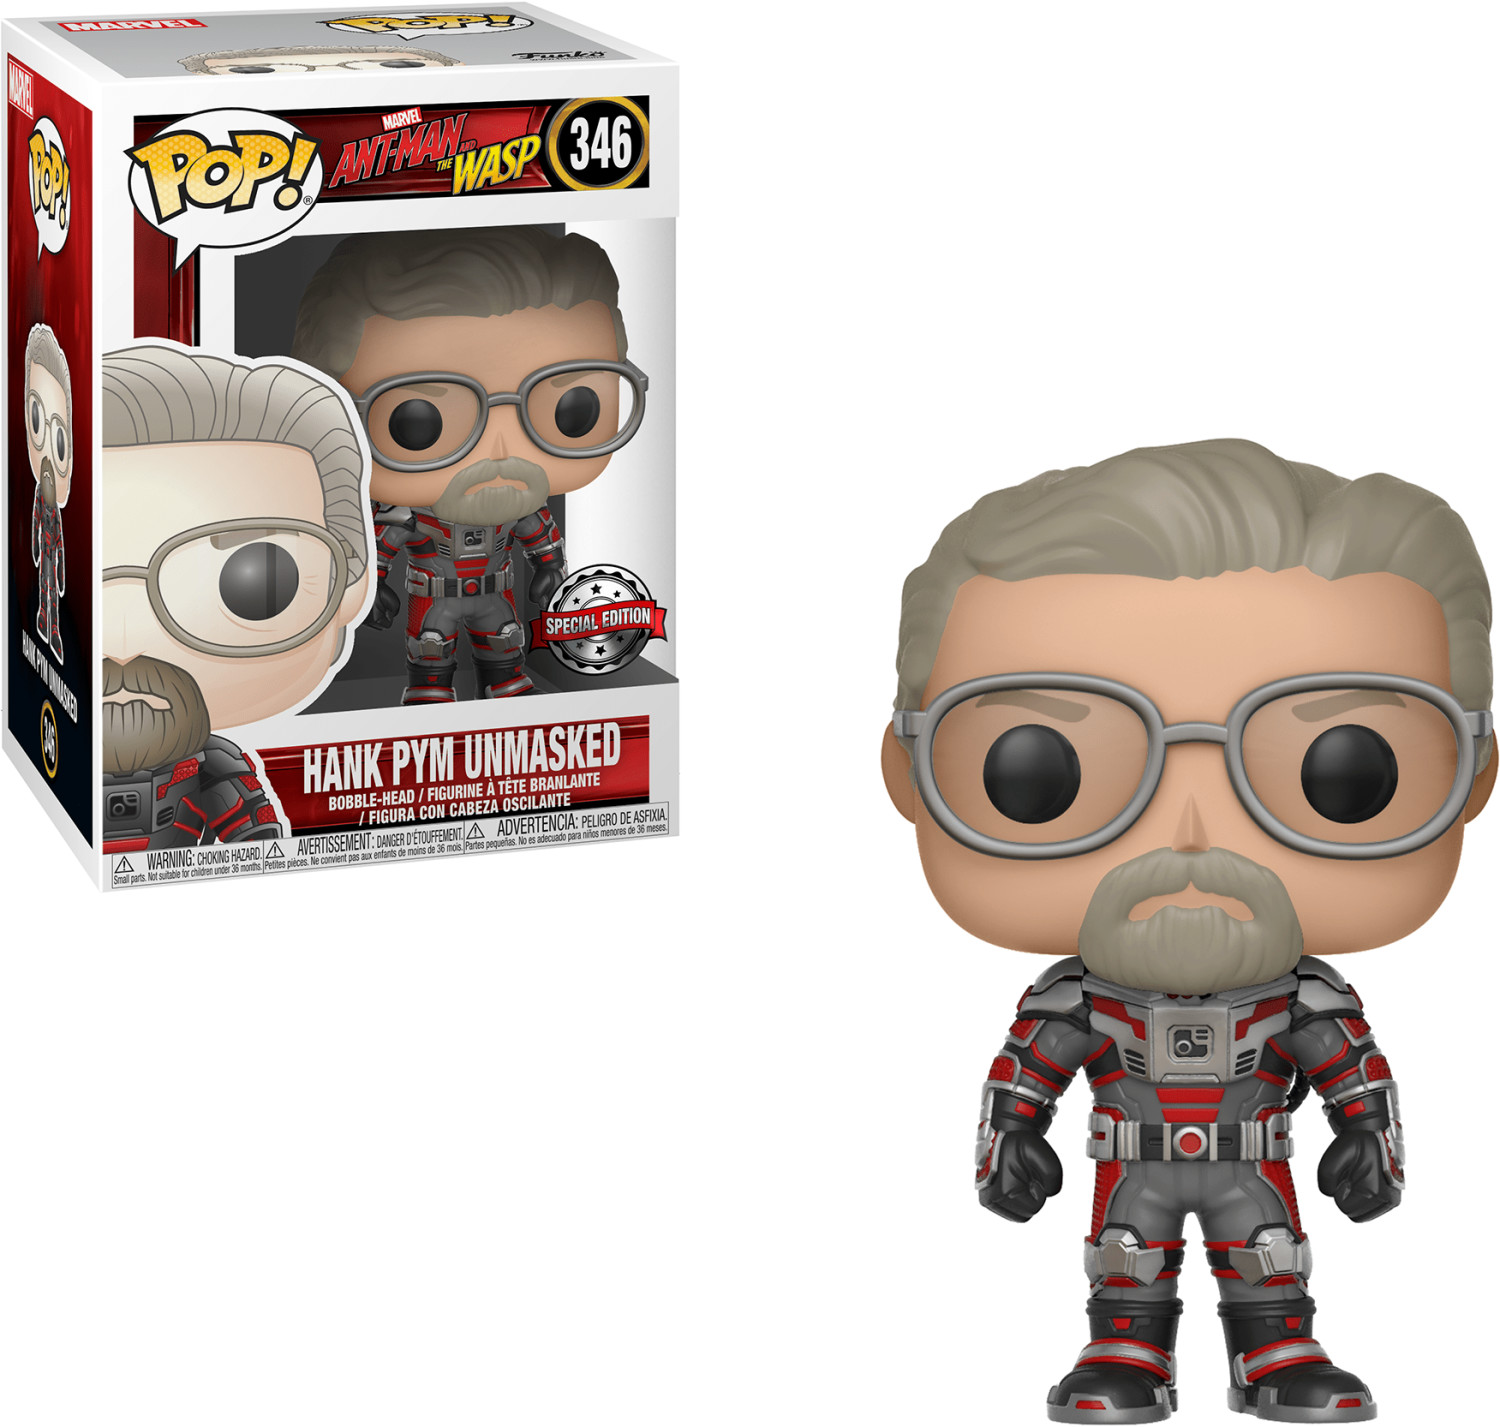 Photos - Action Figures / Transformers Funko Pop! Marvel: Ant-Man and the Wasp - Hank Pym Unmasked  (346)